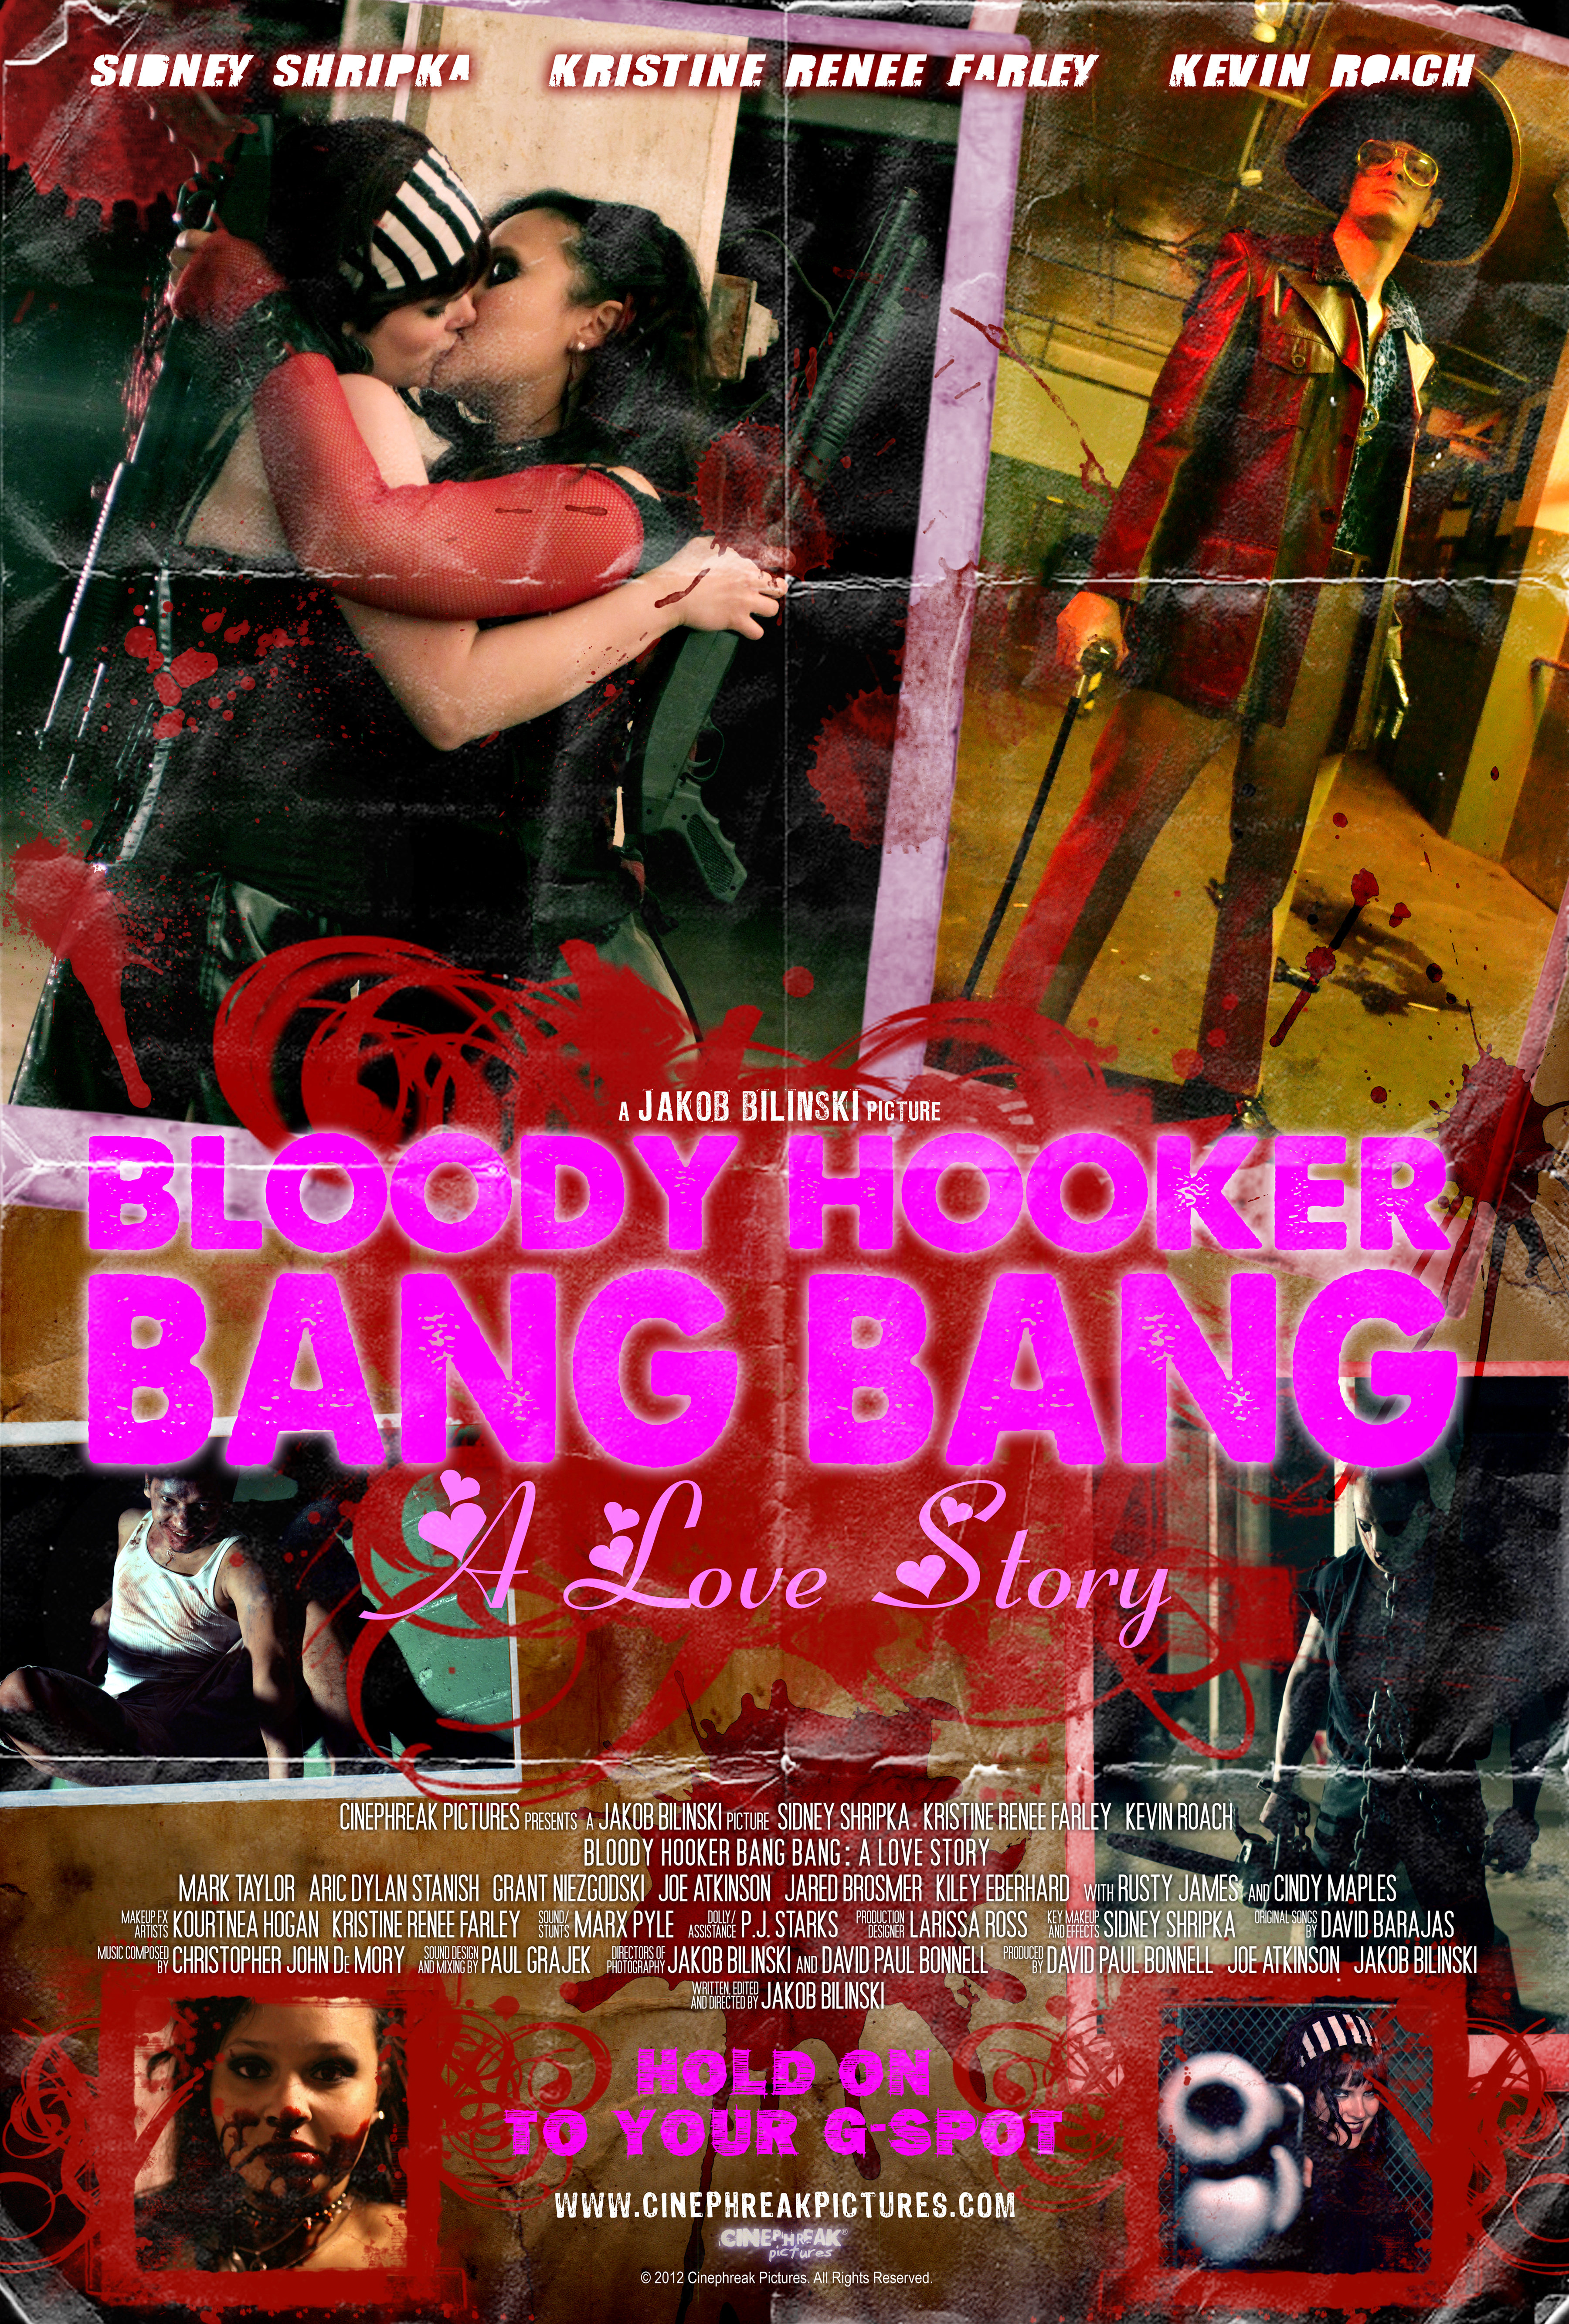 Official poster for BLOODY HOOKER BANG BANG: A LOVE STORY